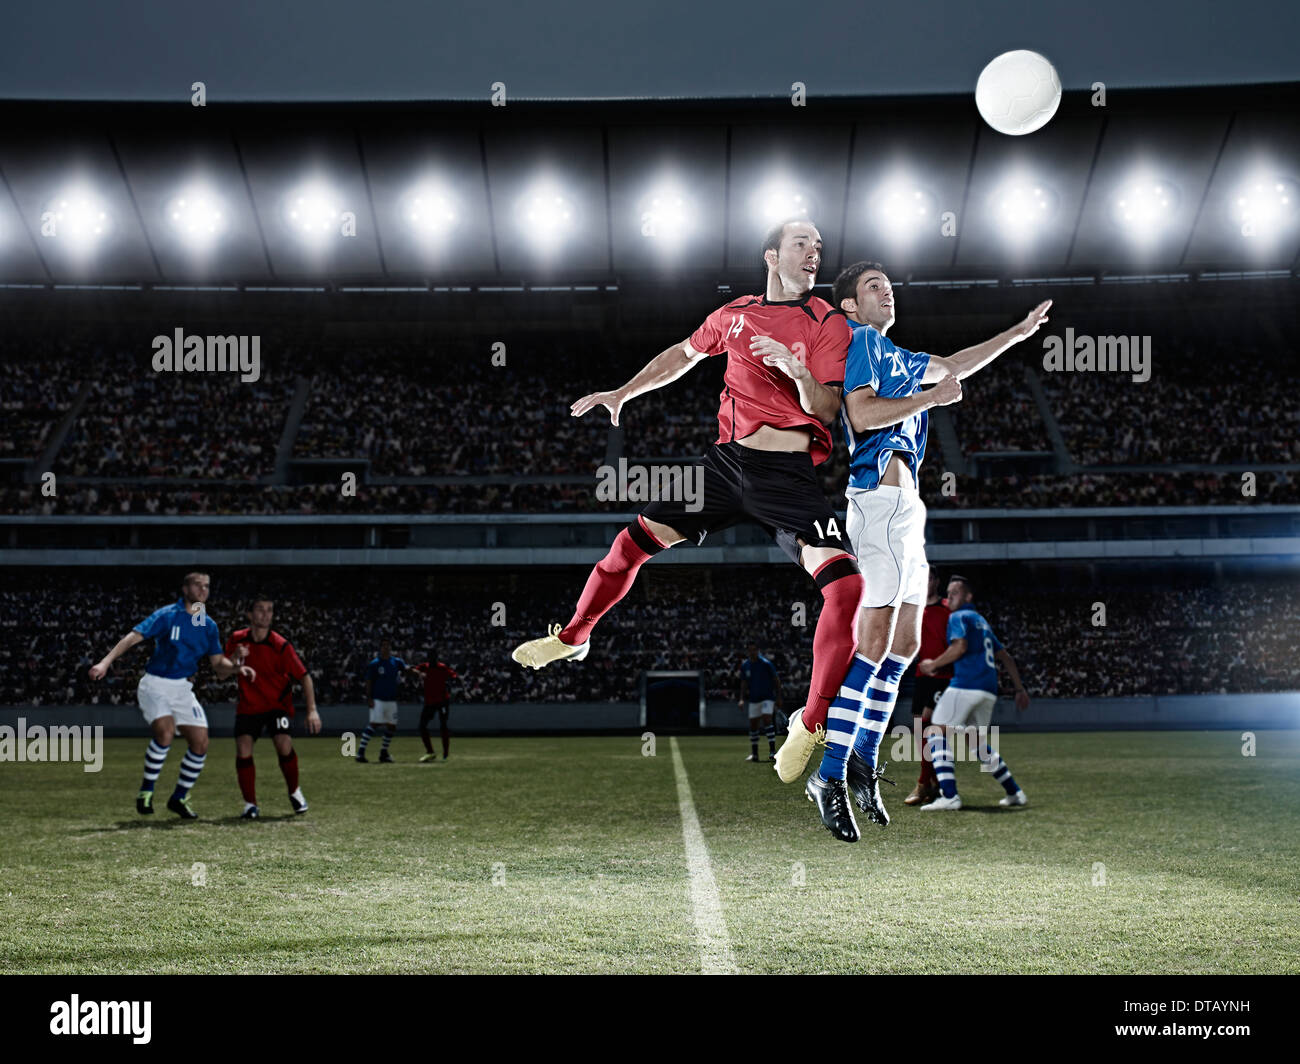 Soccer players jumping for ball on field Stock Photo